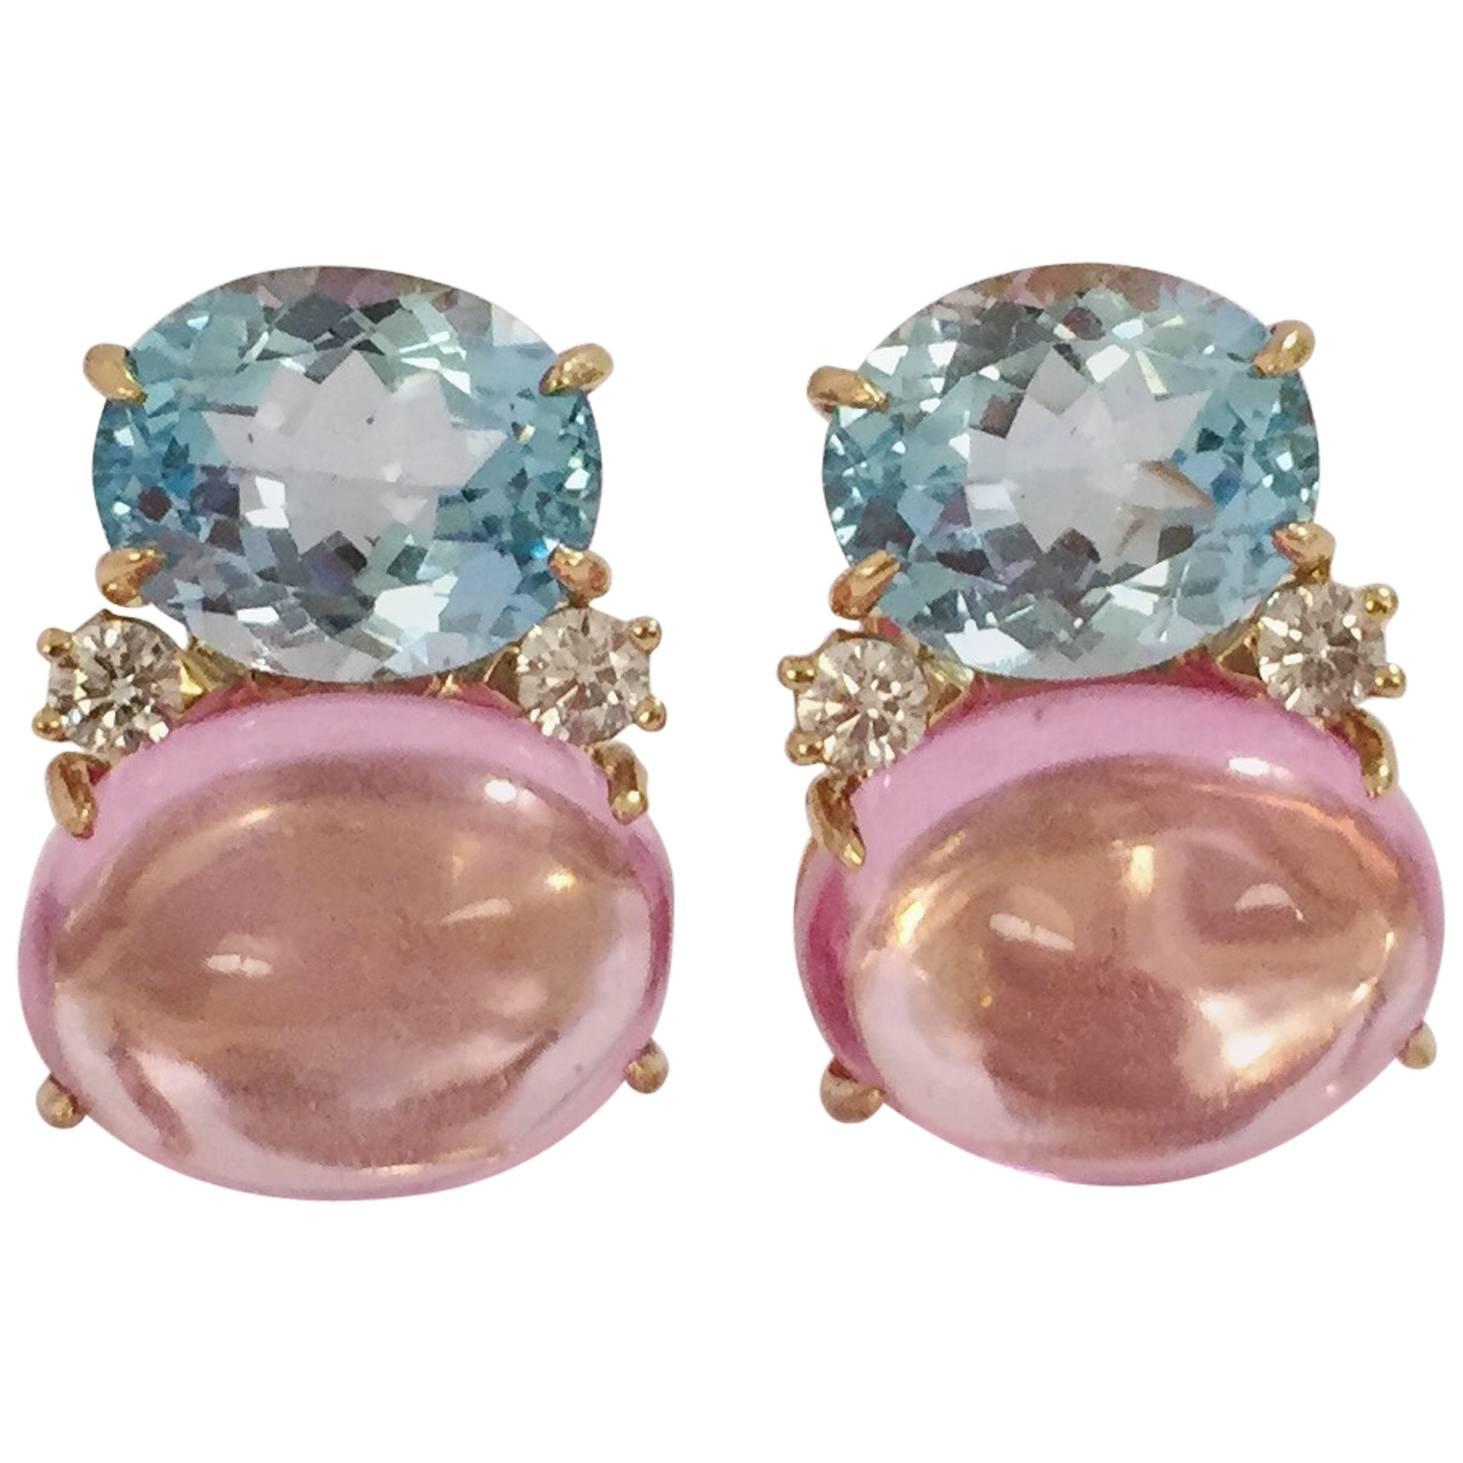 Large GUM DROP Earrings with Blue Topaz and Cabochon Pink Topaz and Diamonds